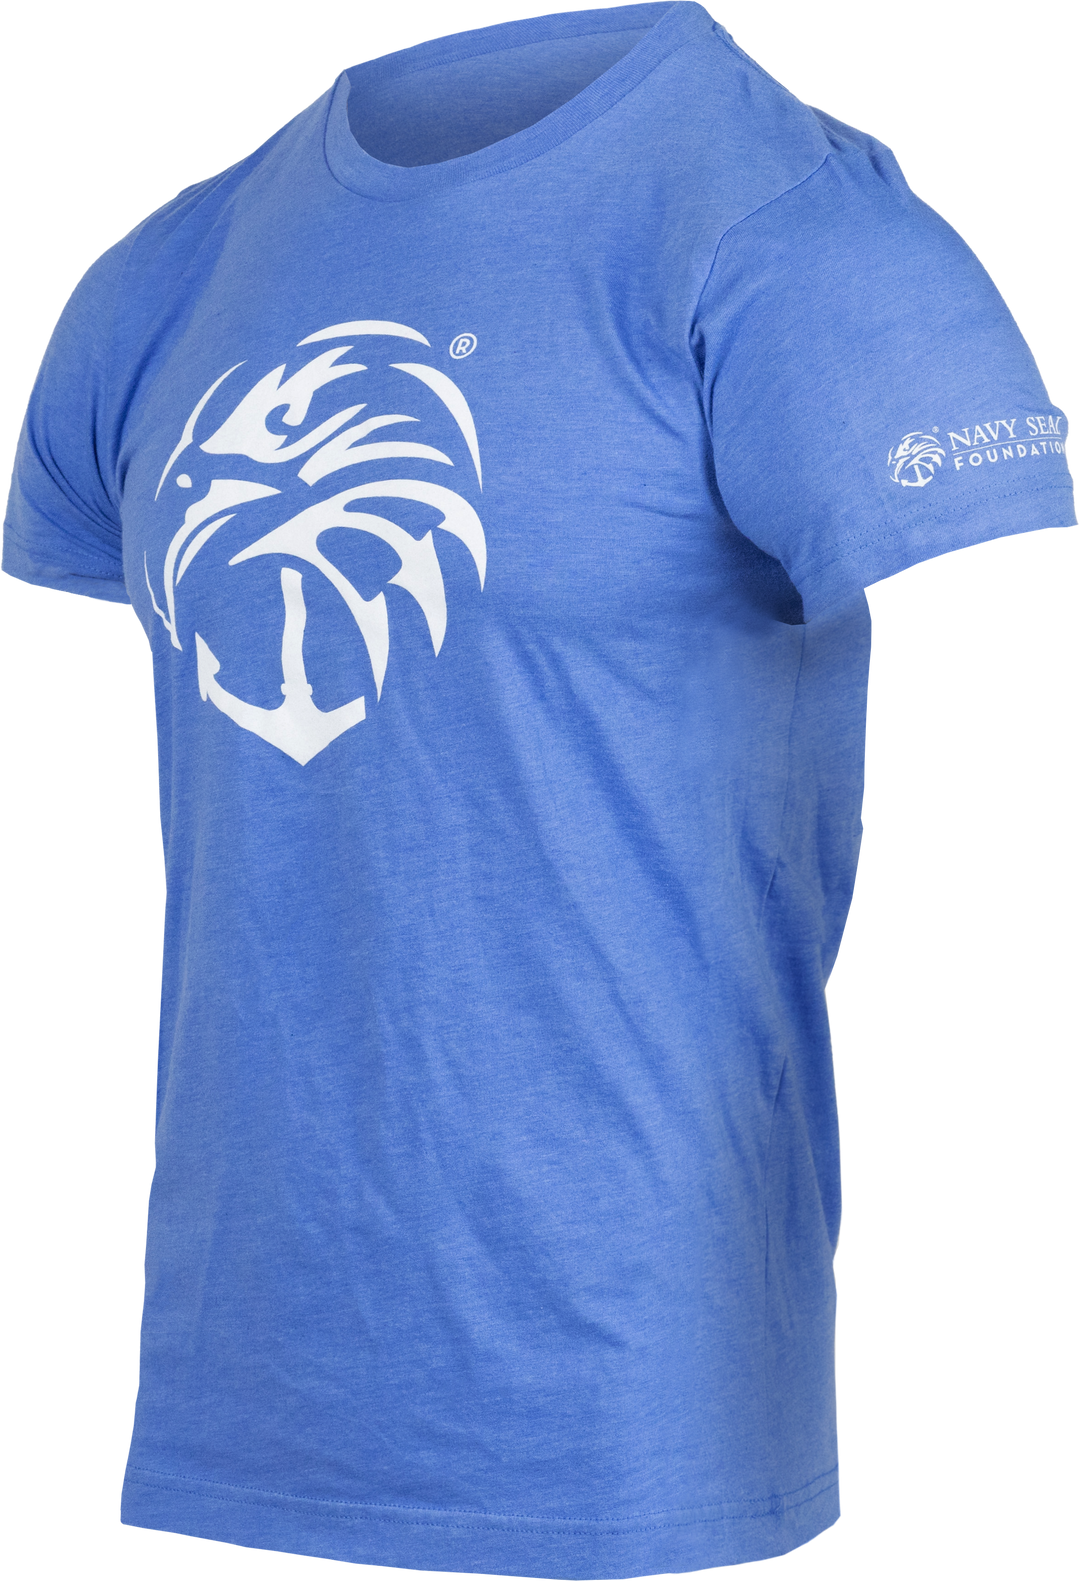 Angled view of Columbia Blue tee with Navy Seal foundation logo in white on front and white "NAVY SEAL FOUNDATION" text and logo on left sleeve